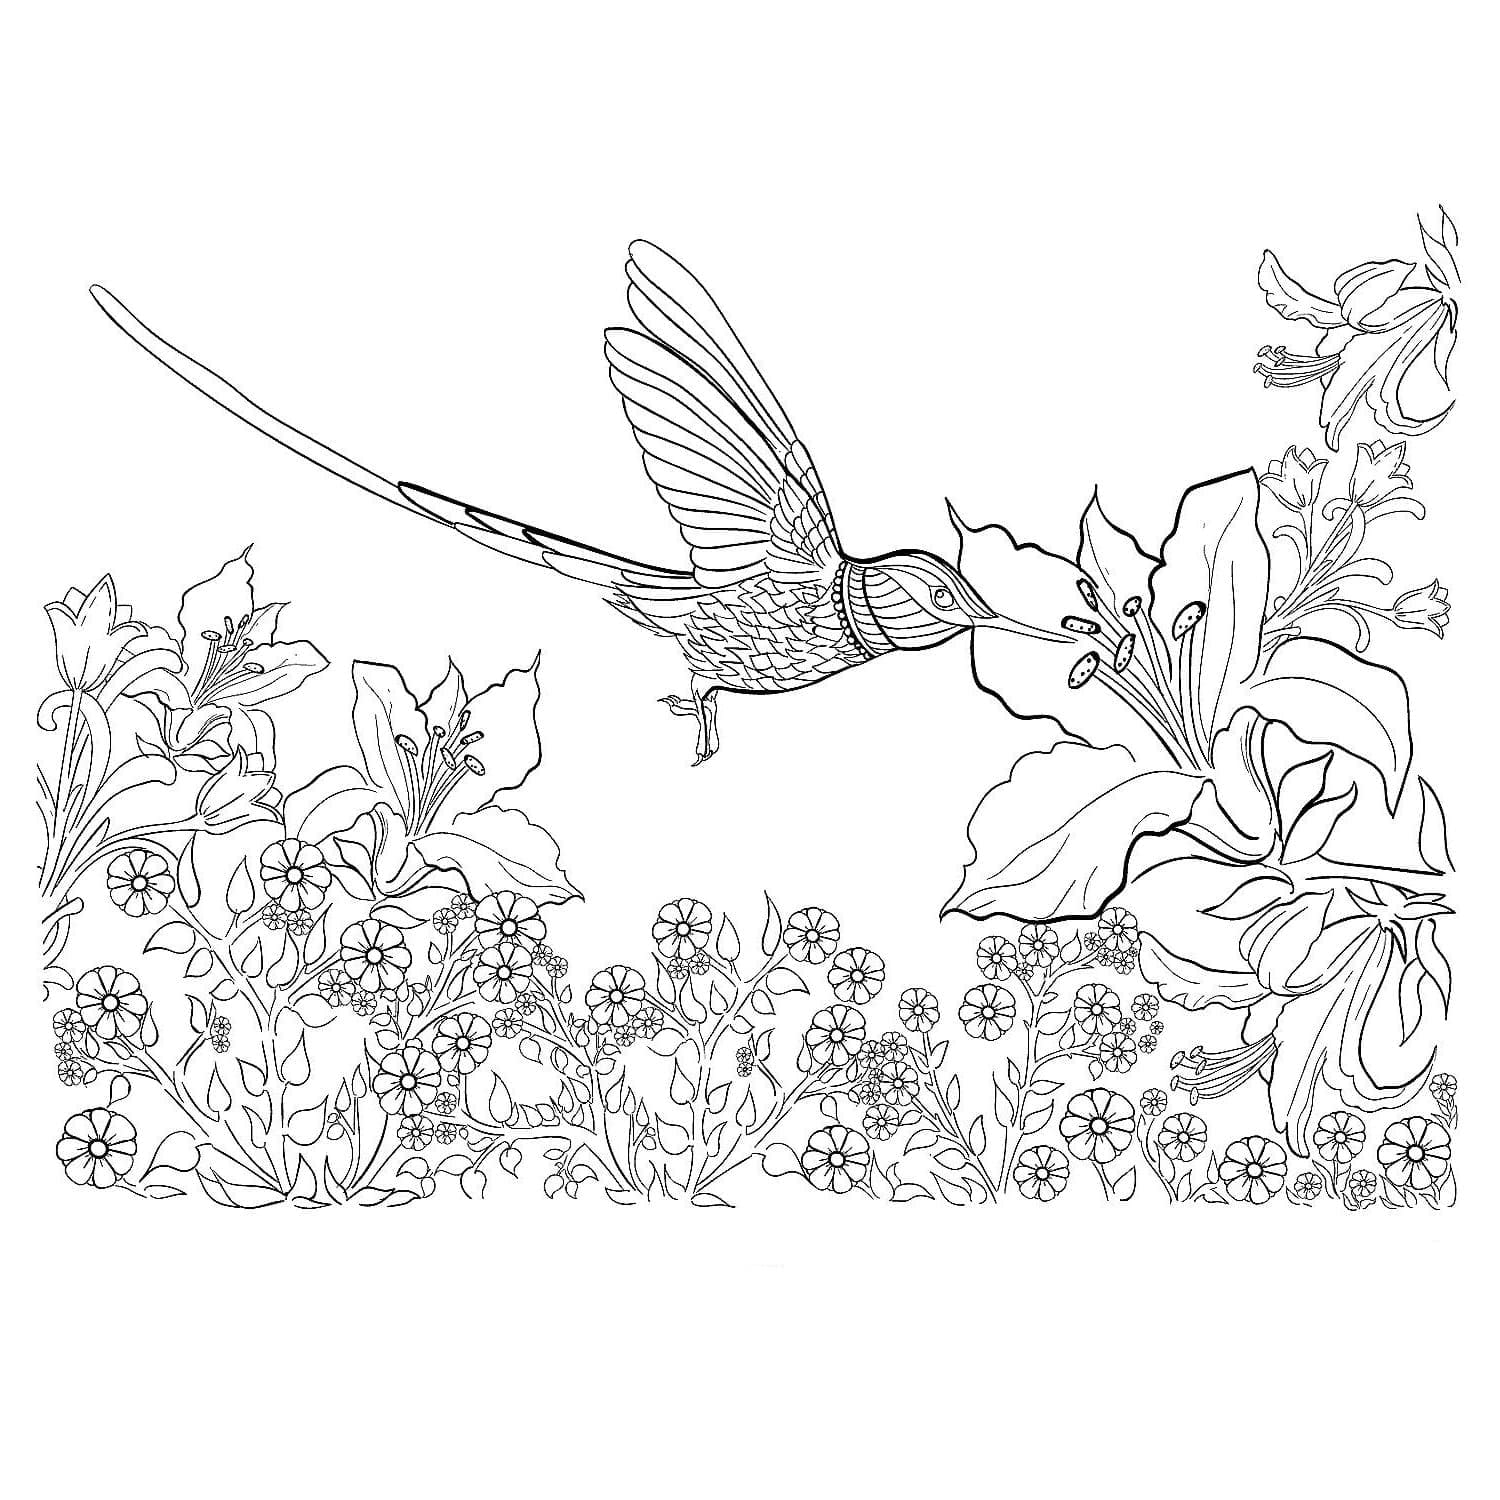 Colibri Incroyable coloring page